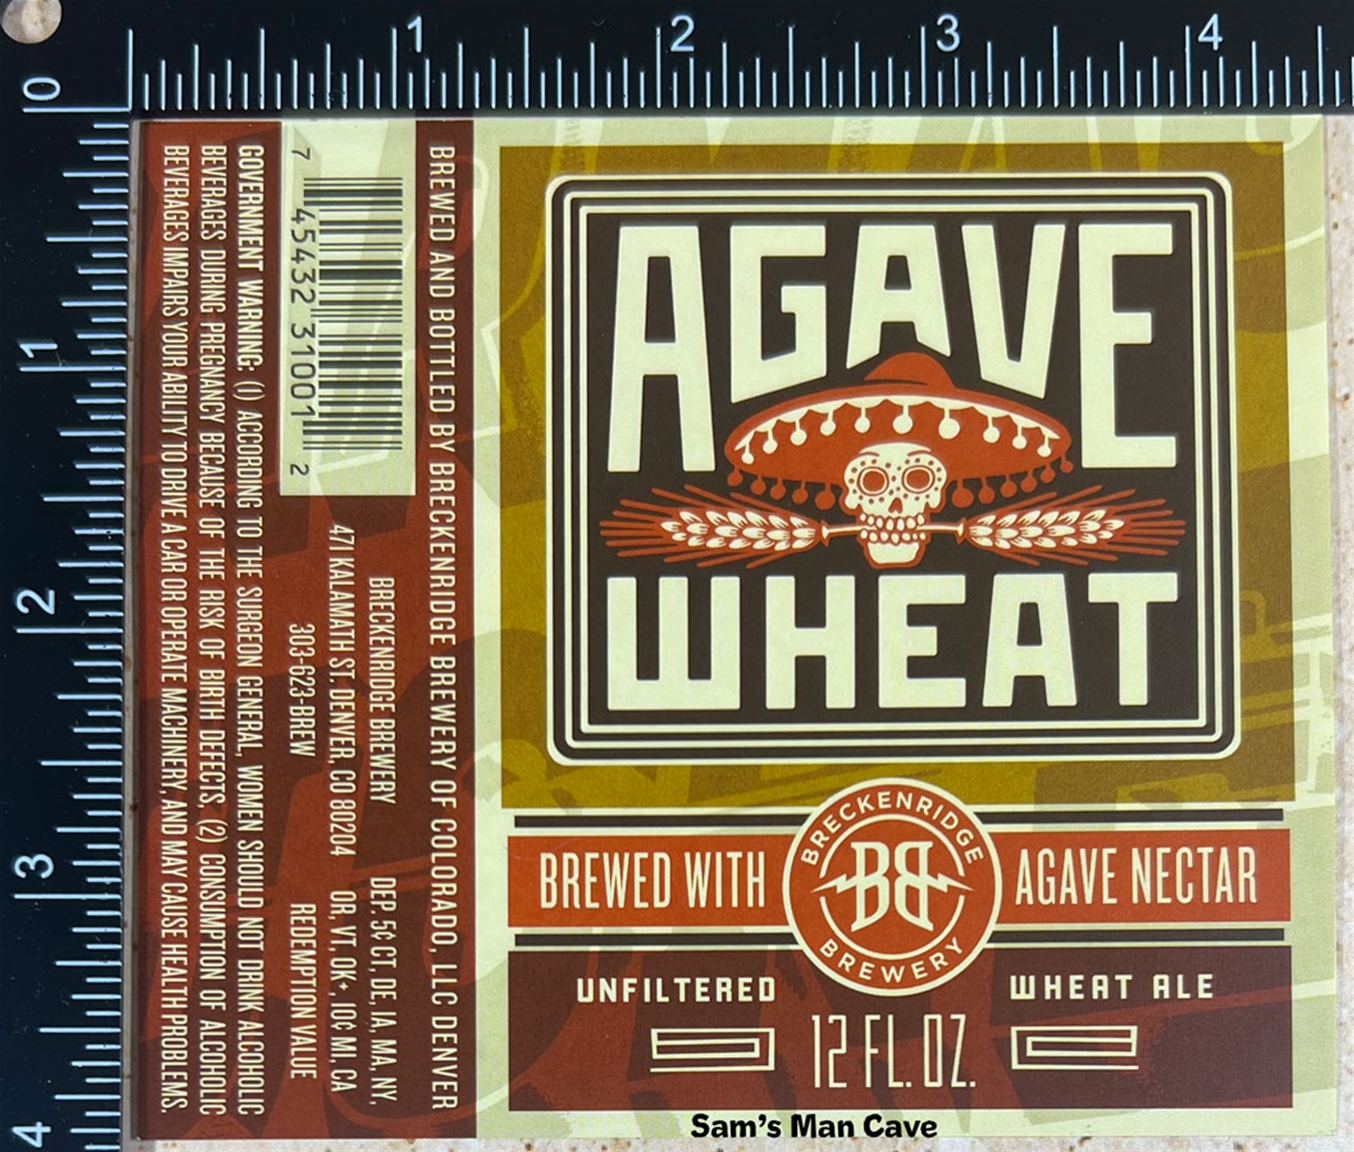 Agave Wheat Ale Label